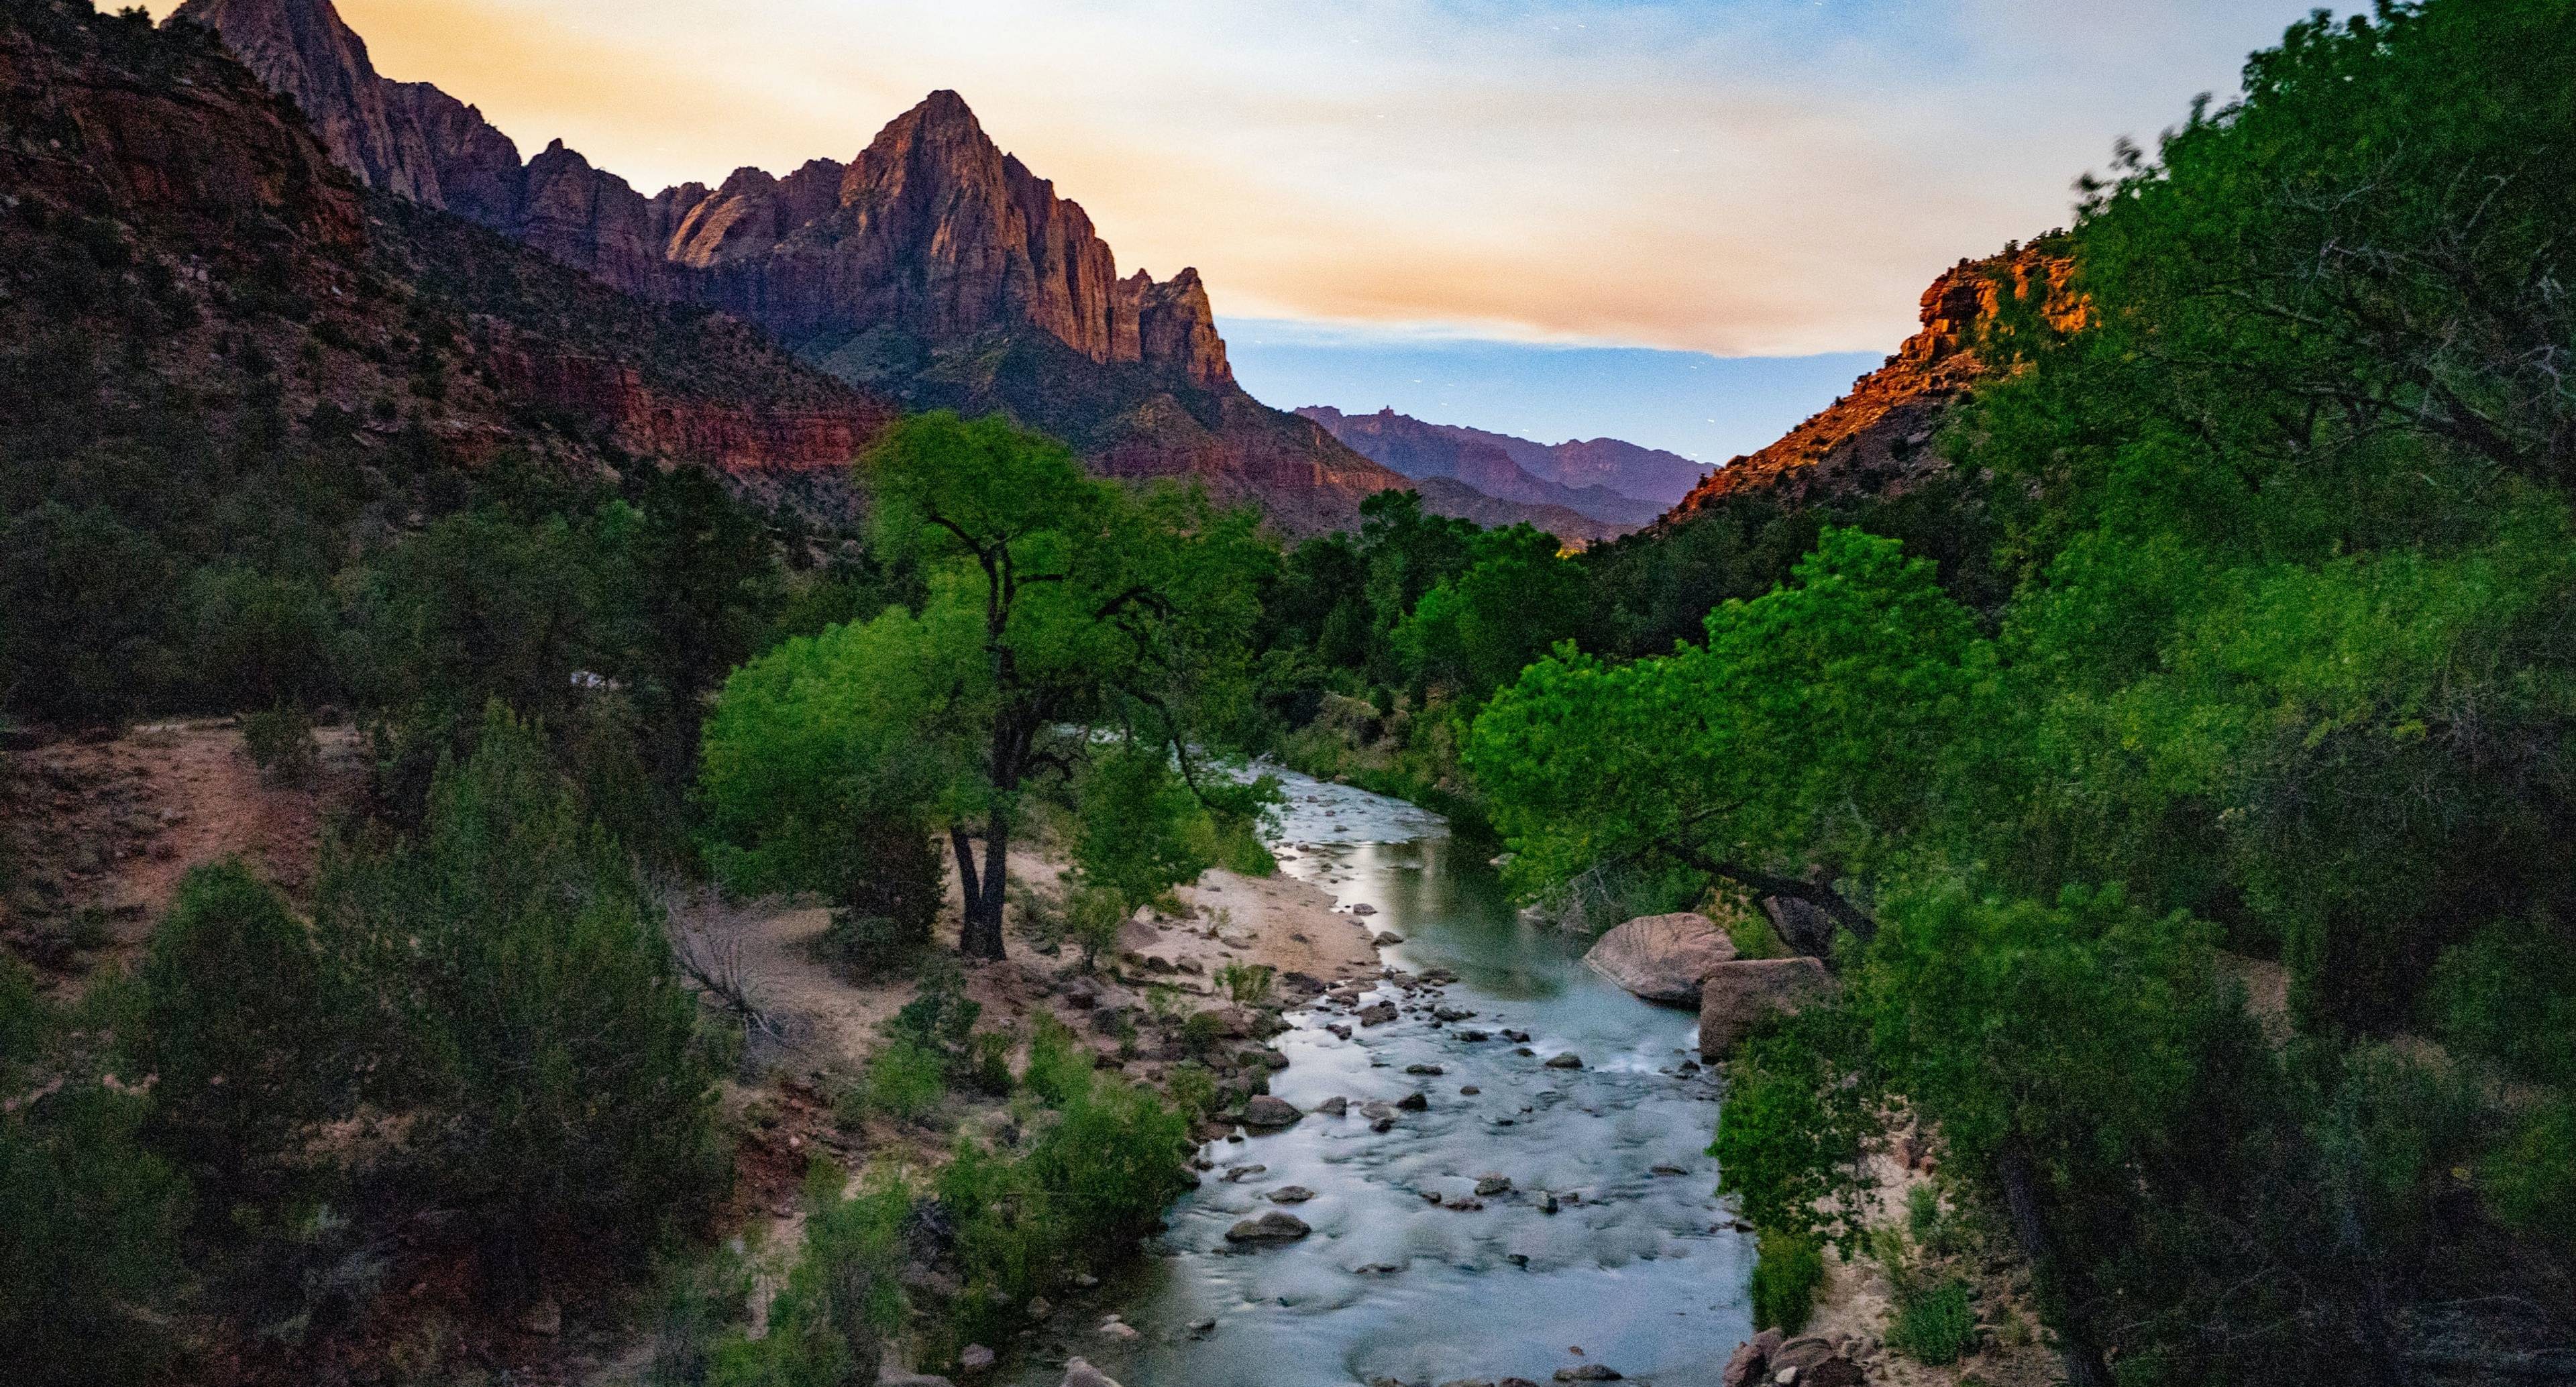 Hike in Zion, Discover Dinosaur Fossils, and Eat Some Fabulous Meals